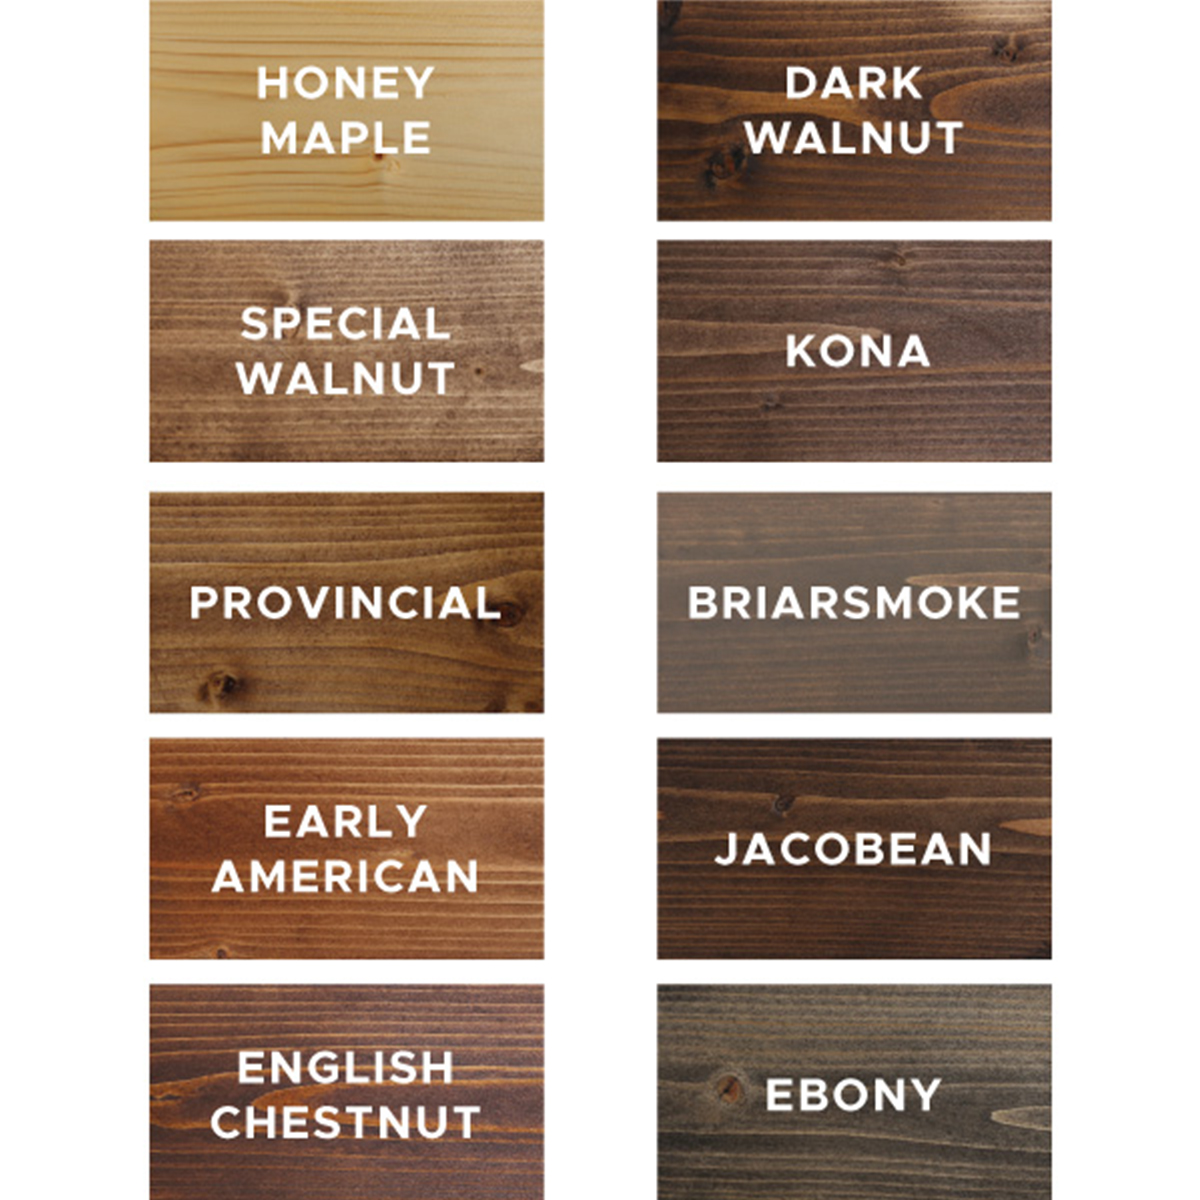 10 Favorite Wood Stain Colors - Angela Marie Made